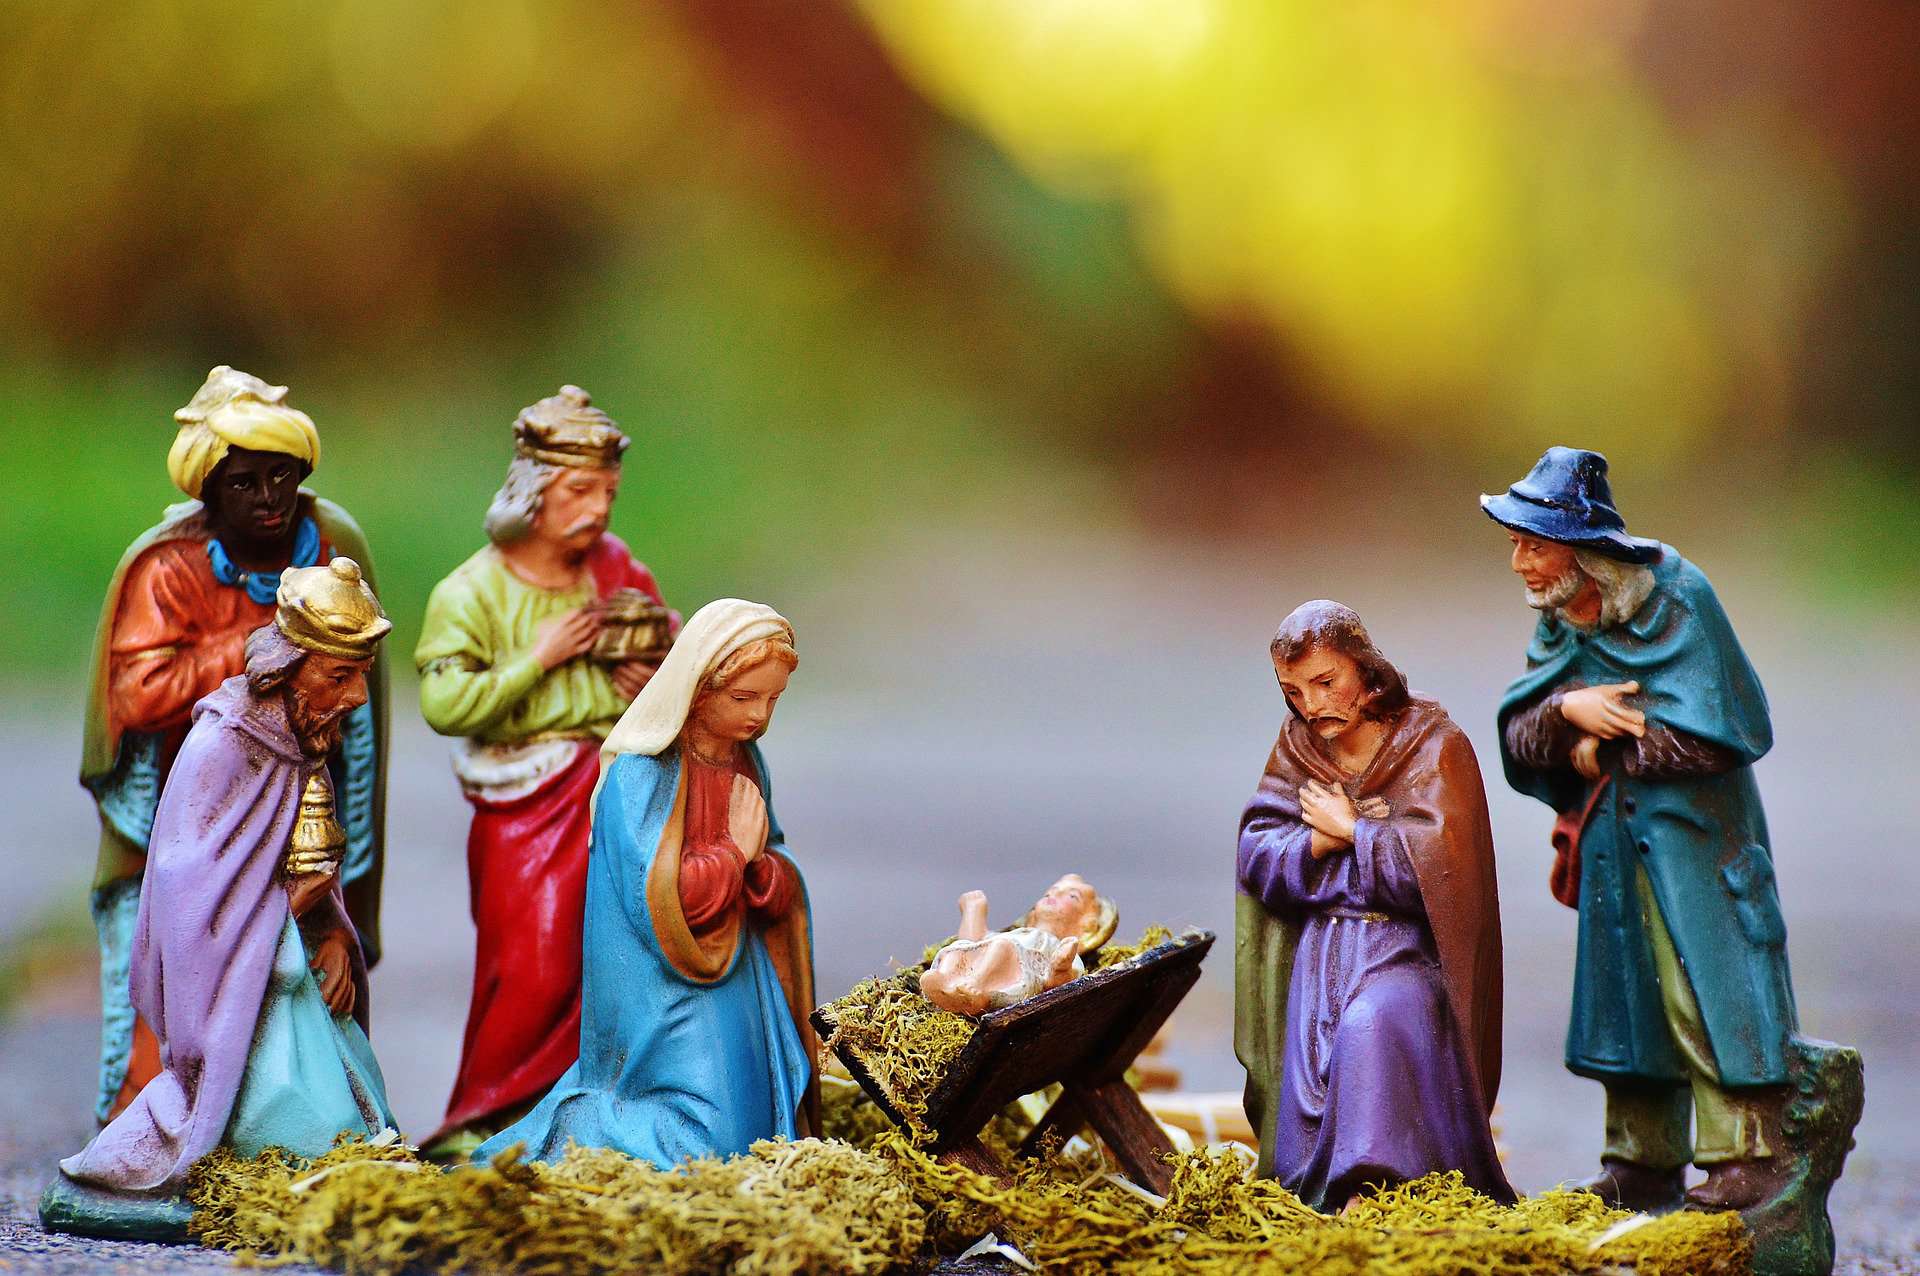 Facing the Brokenness of the Manger